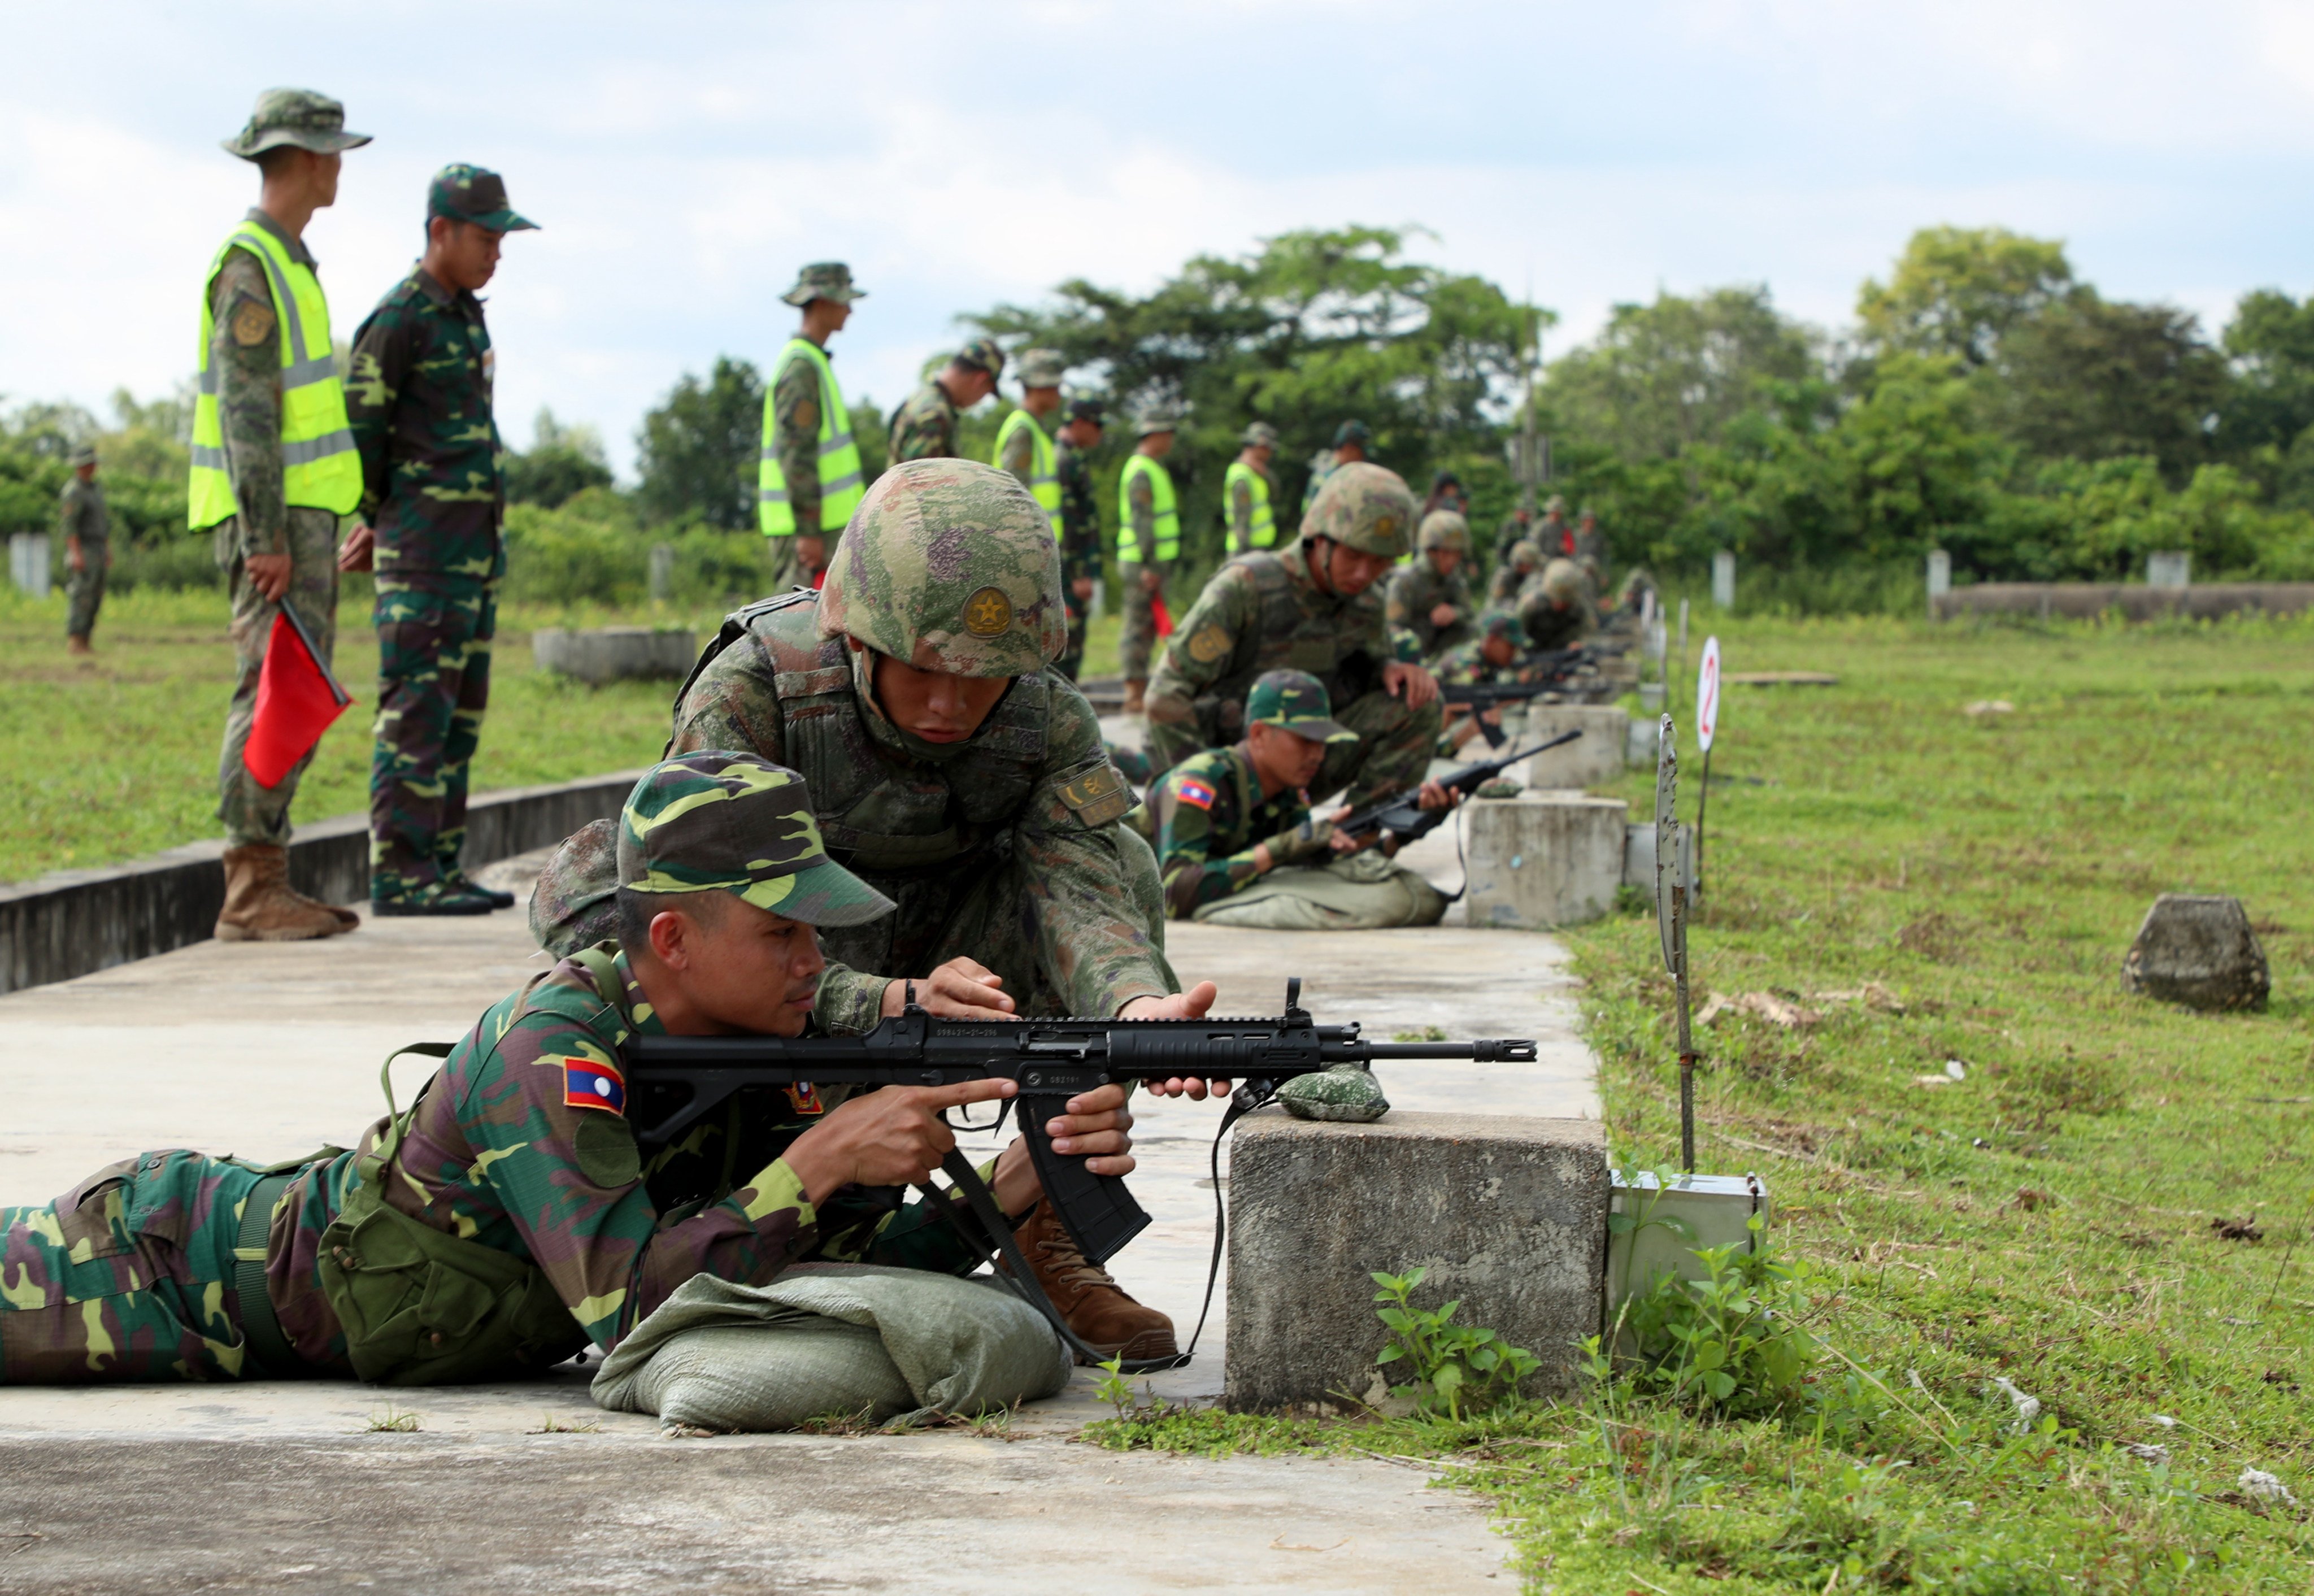 Chinese and Laotian troops take part in a military exercise in Laos on July 8. Photo: Xinhua